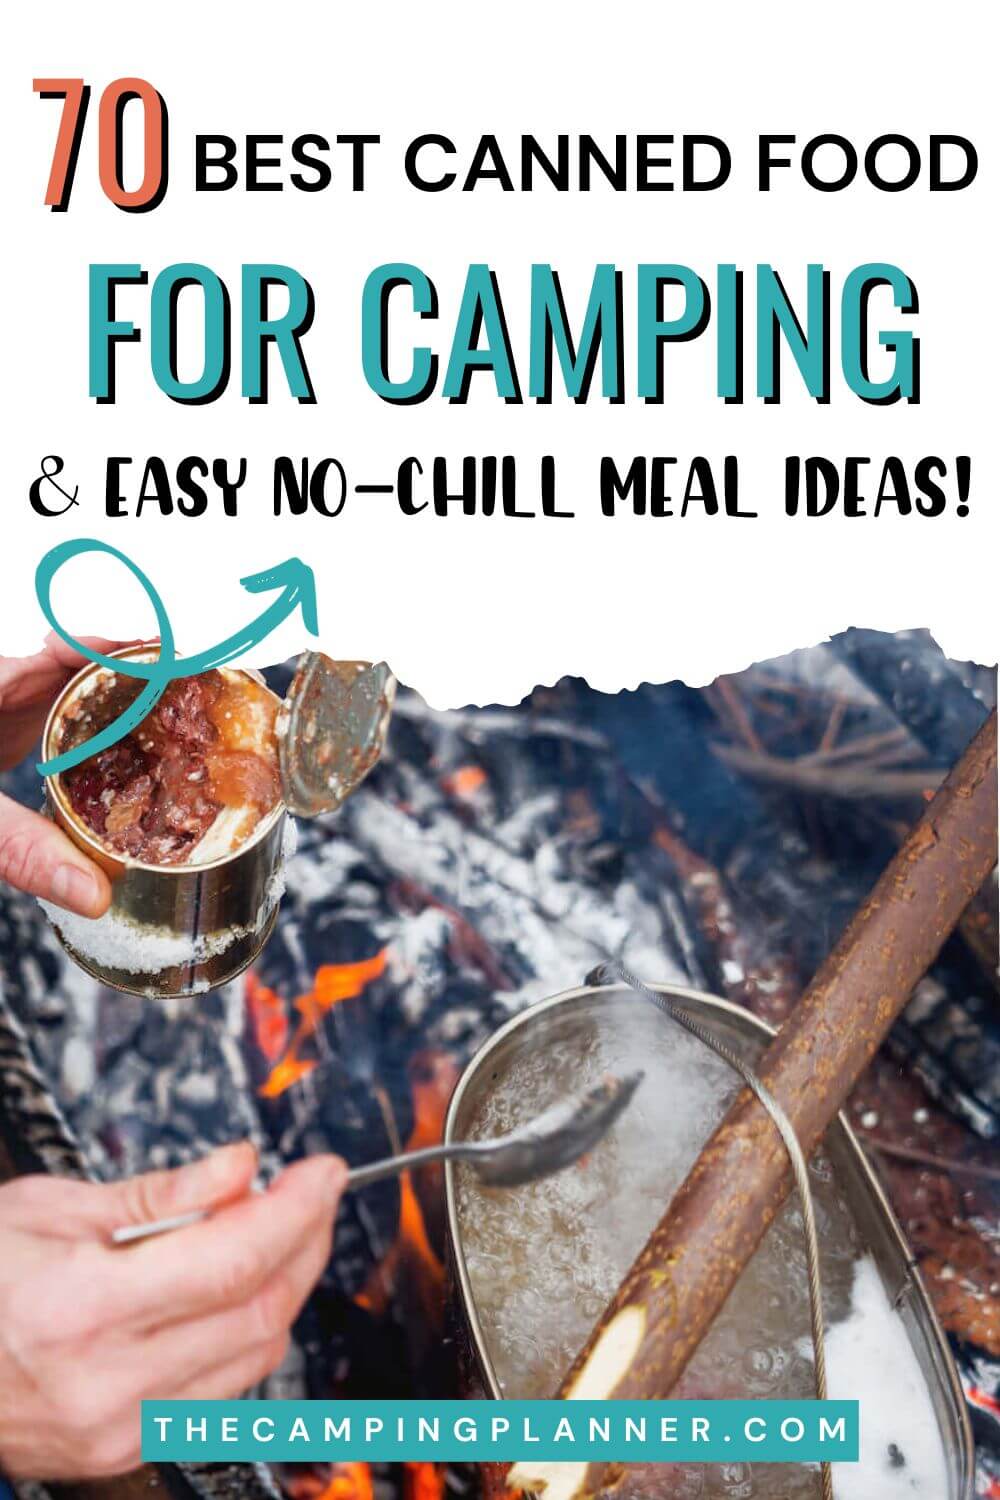 70 best canned food for camping and easy no chill meal ideas.